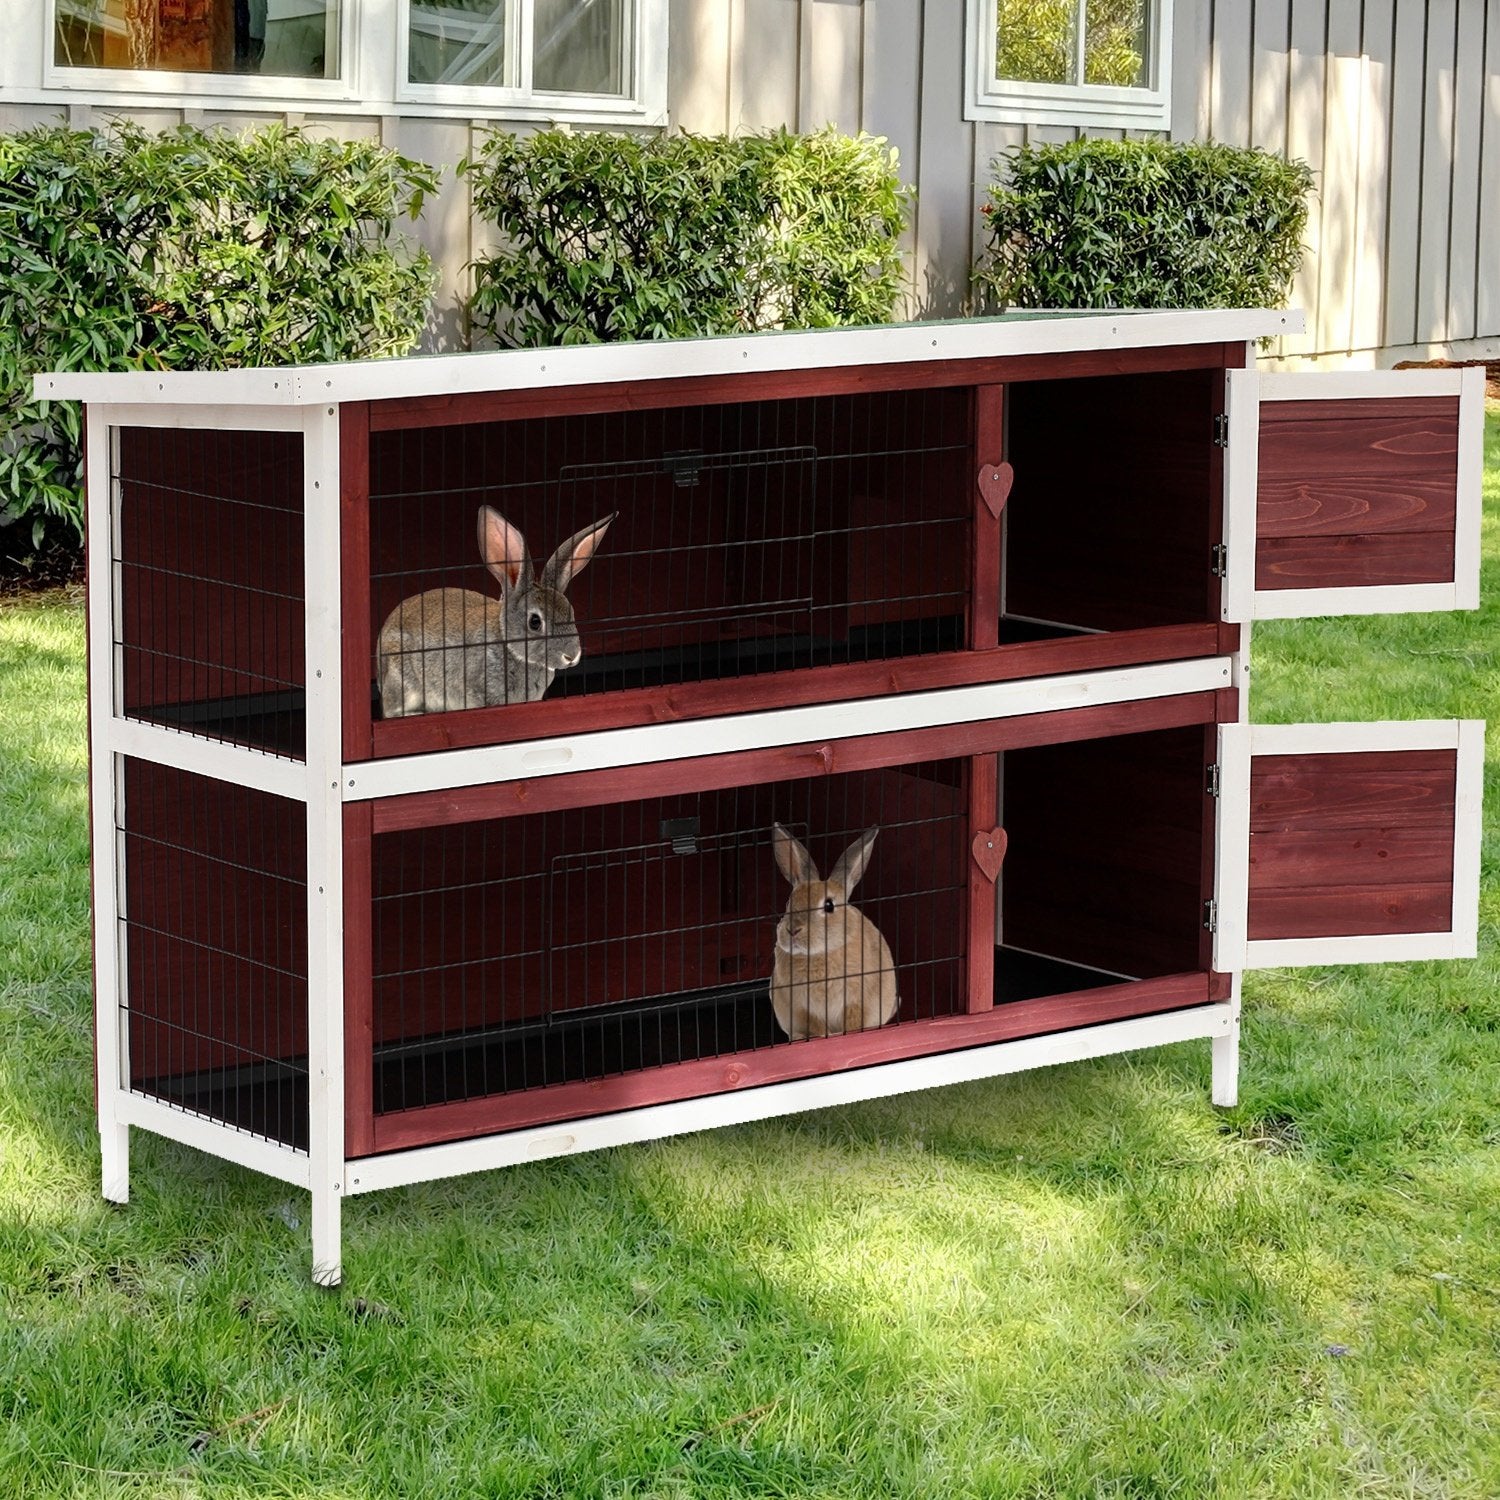 Two-Tier Double Decker Wooden Rabbit Hutch Pet Cage 136.4Lx50Wx93H cm-Brown/White - Inspirely